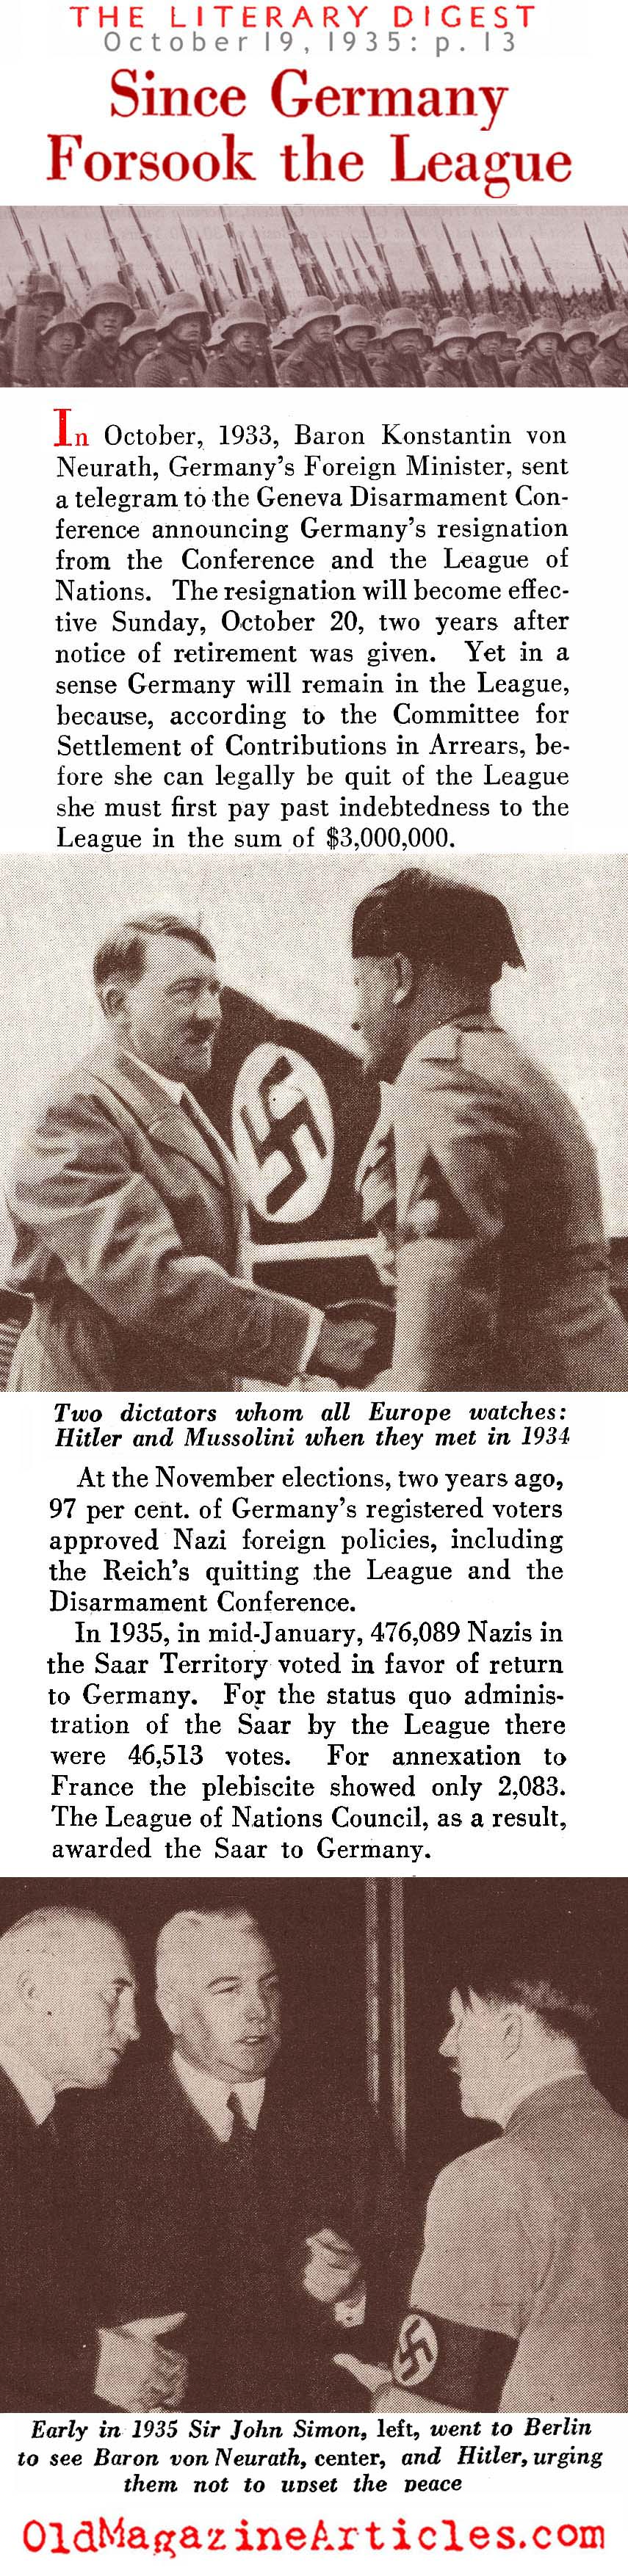 When Germany Quit the League of Nations (Literary Digest, 1935)